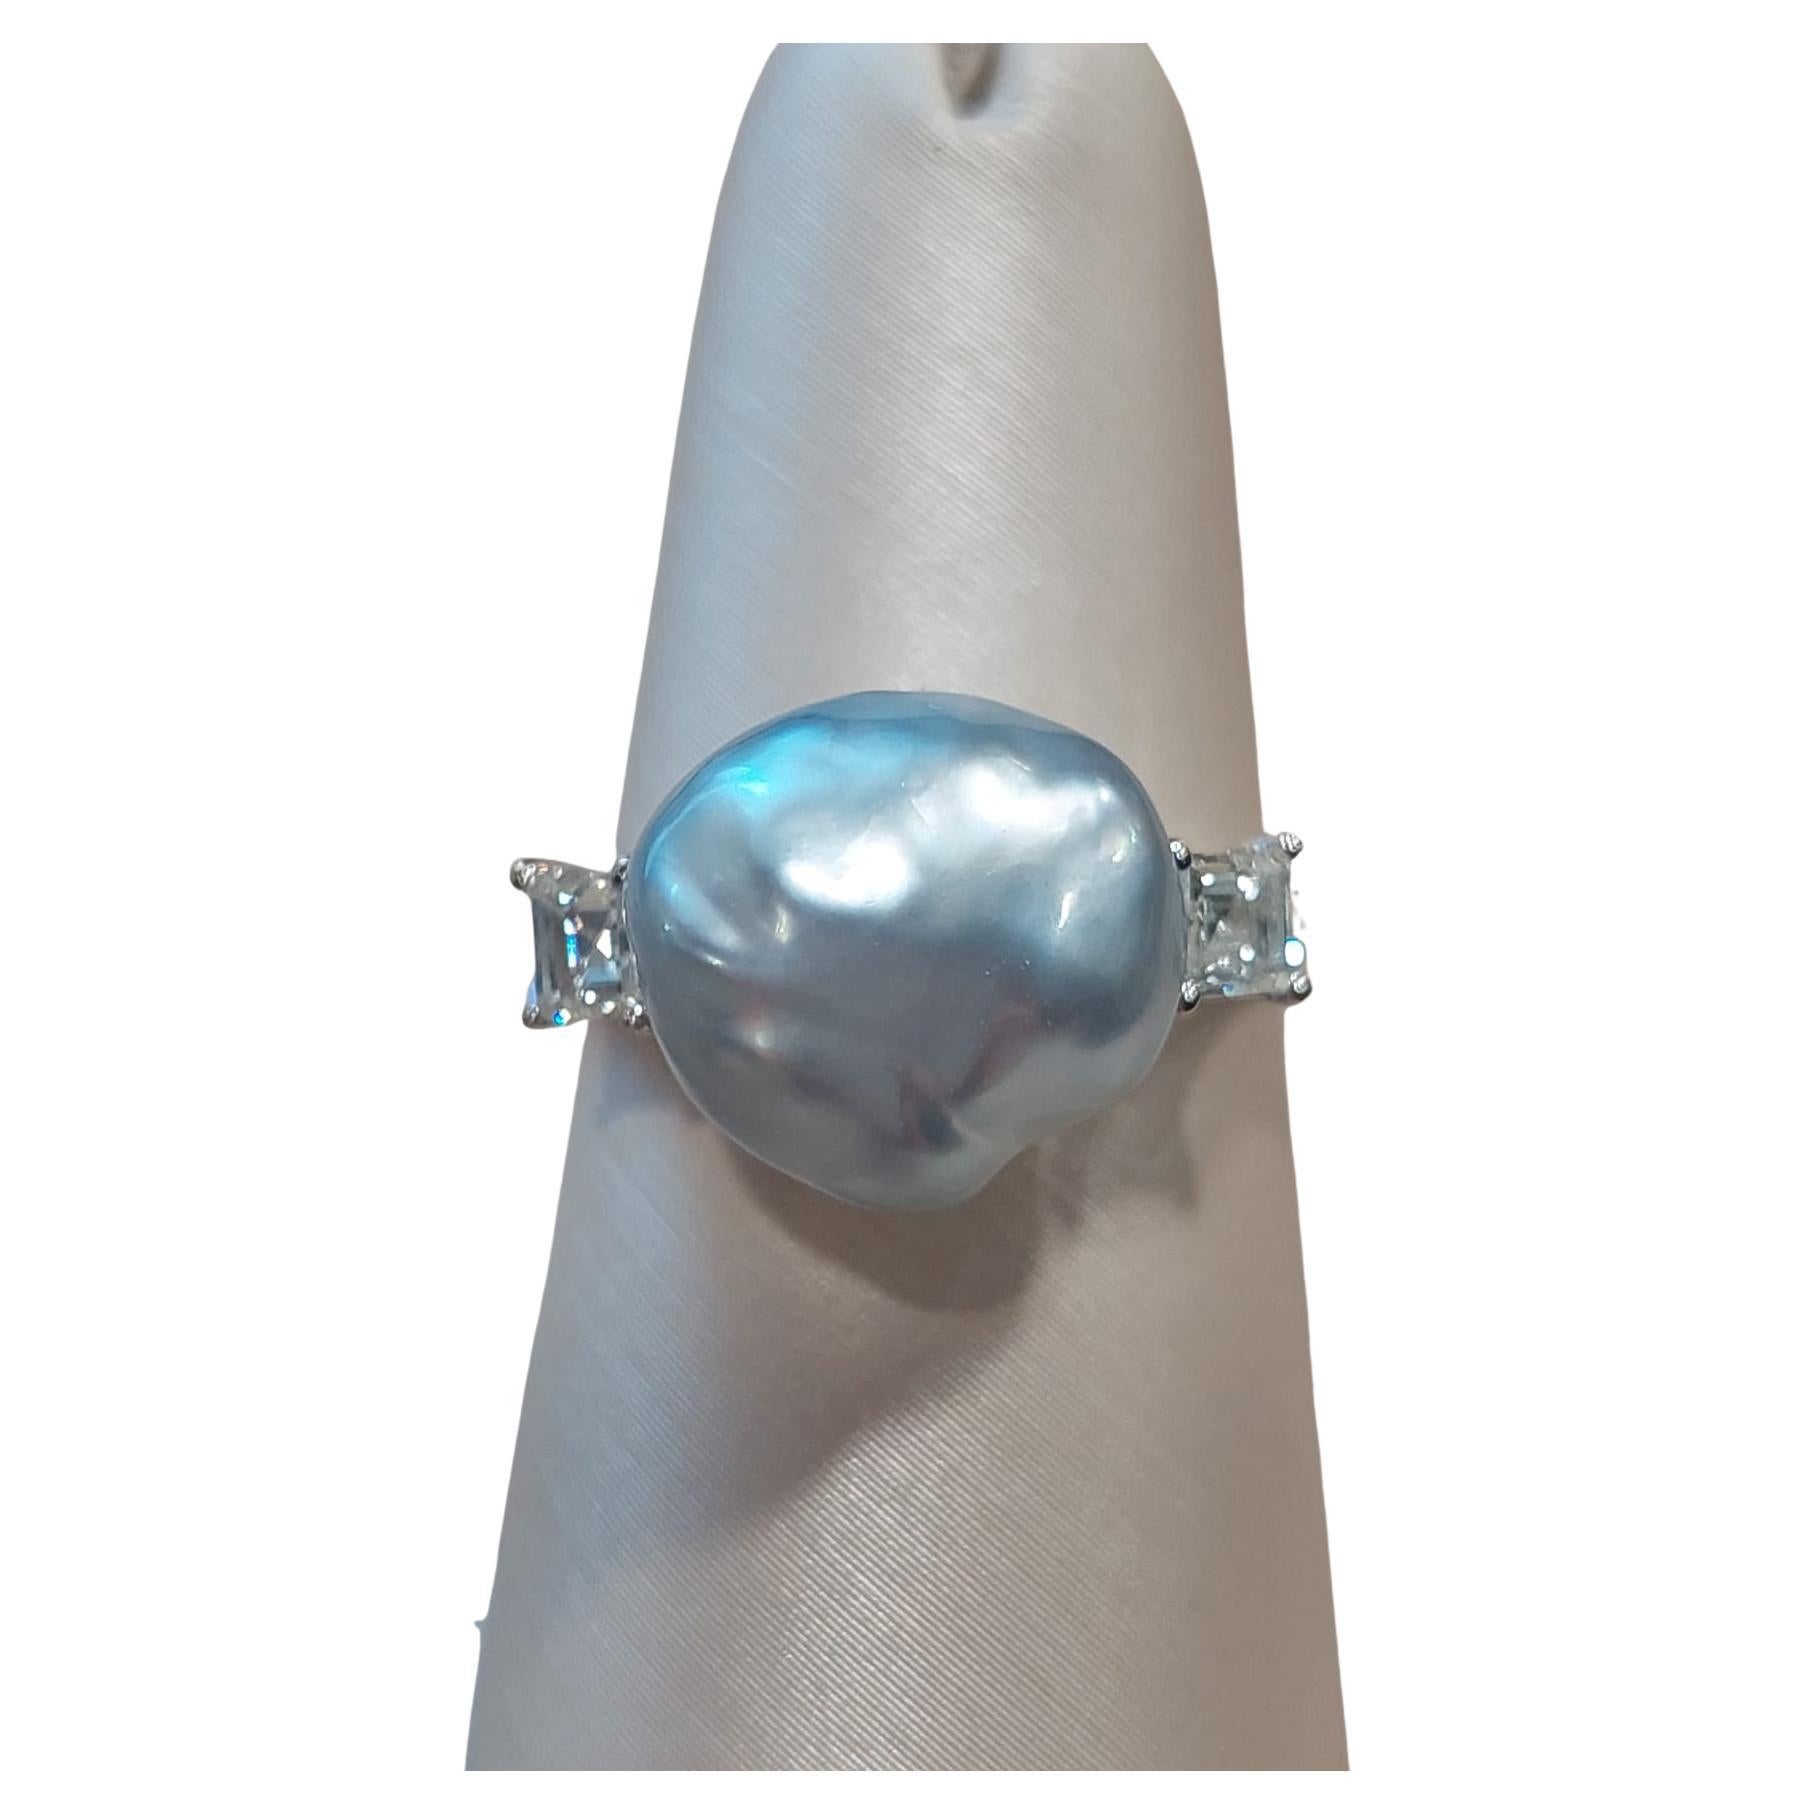 Gilin 18k White Gold Diamond Ring with Silvery Keshi Pearl